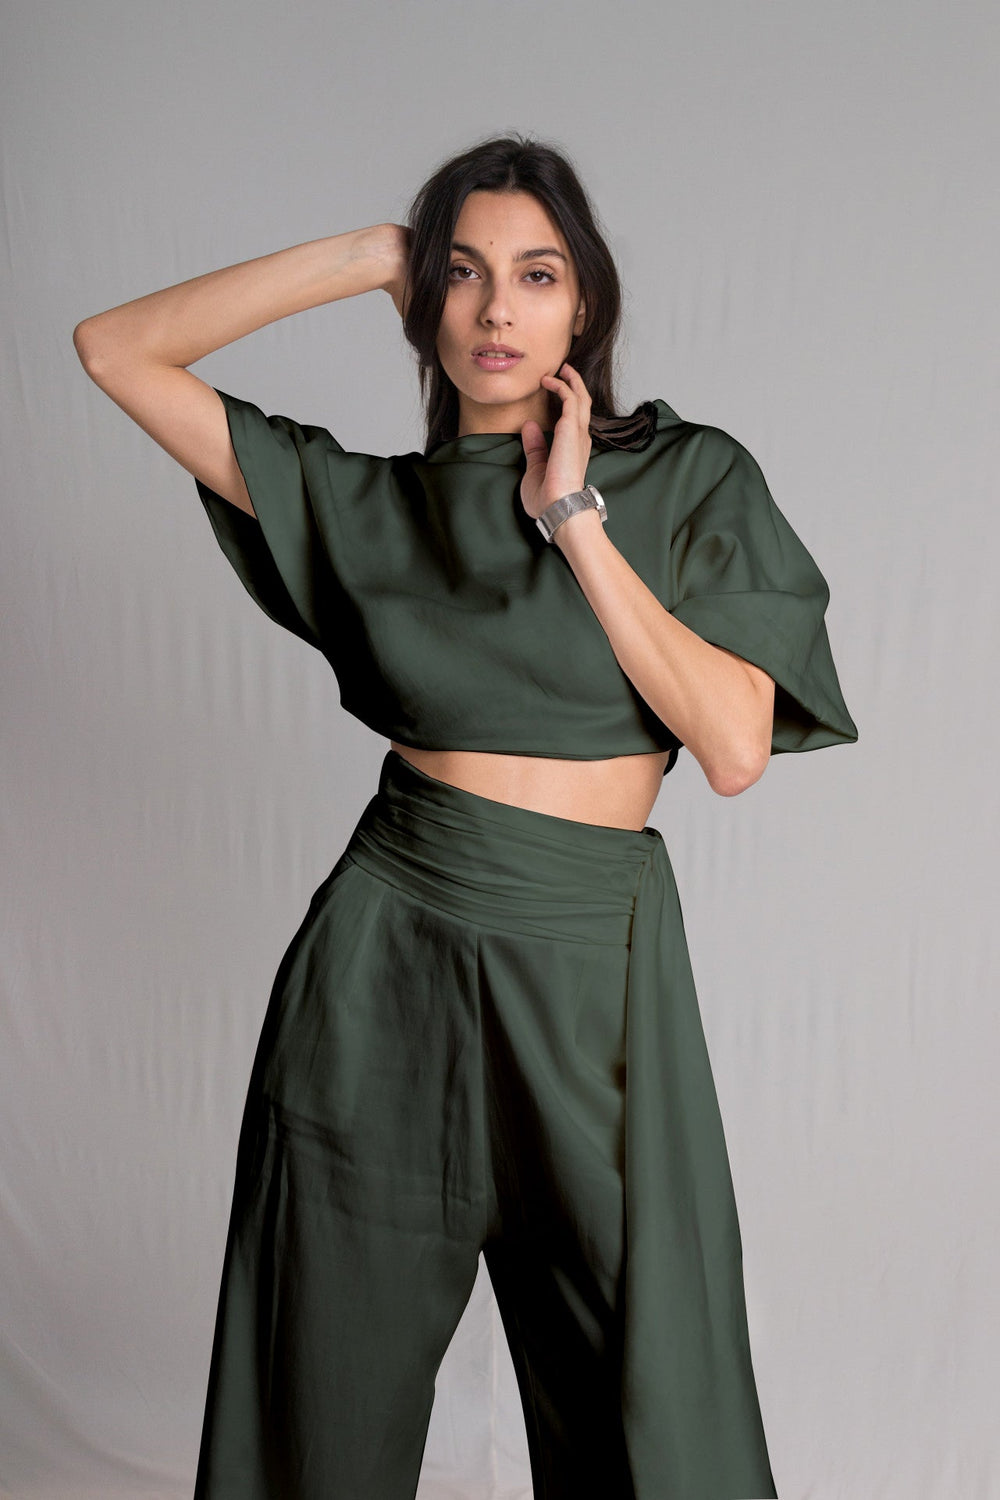 Olive green cropped top with a relaxed cowl neckline and high-waist pants with a hidden zipper pockets and a hand-ruched waistband